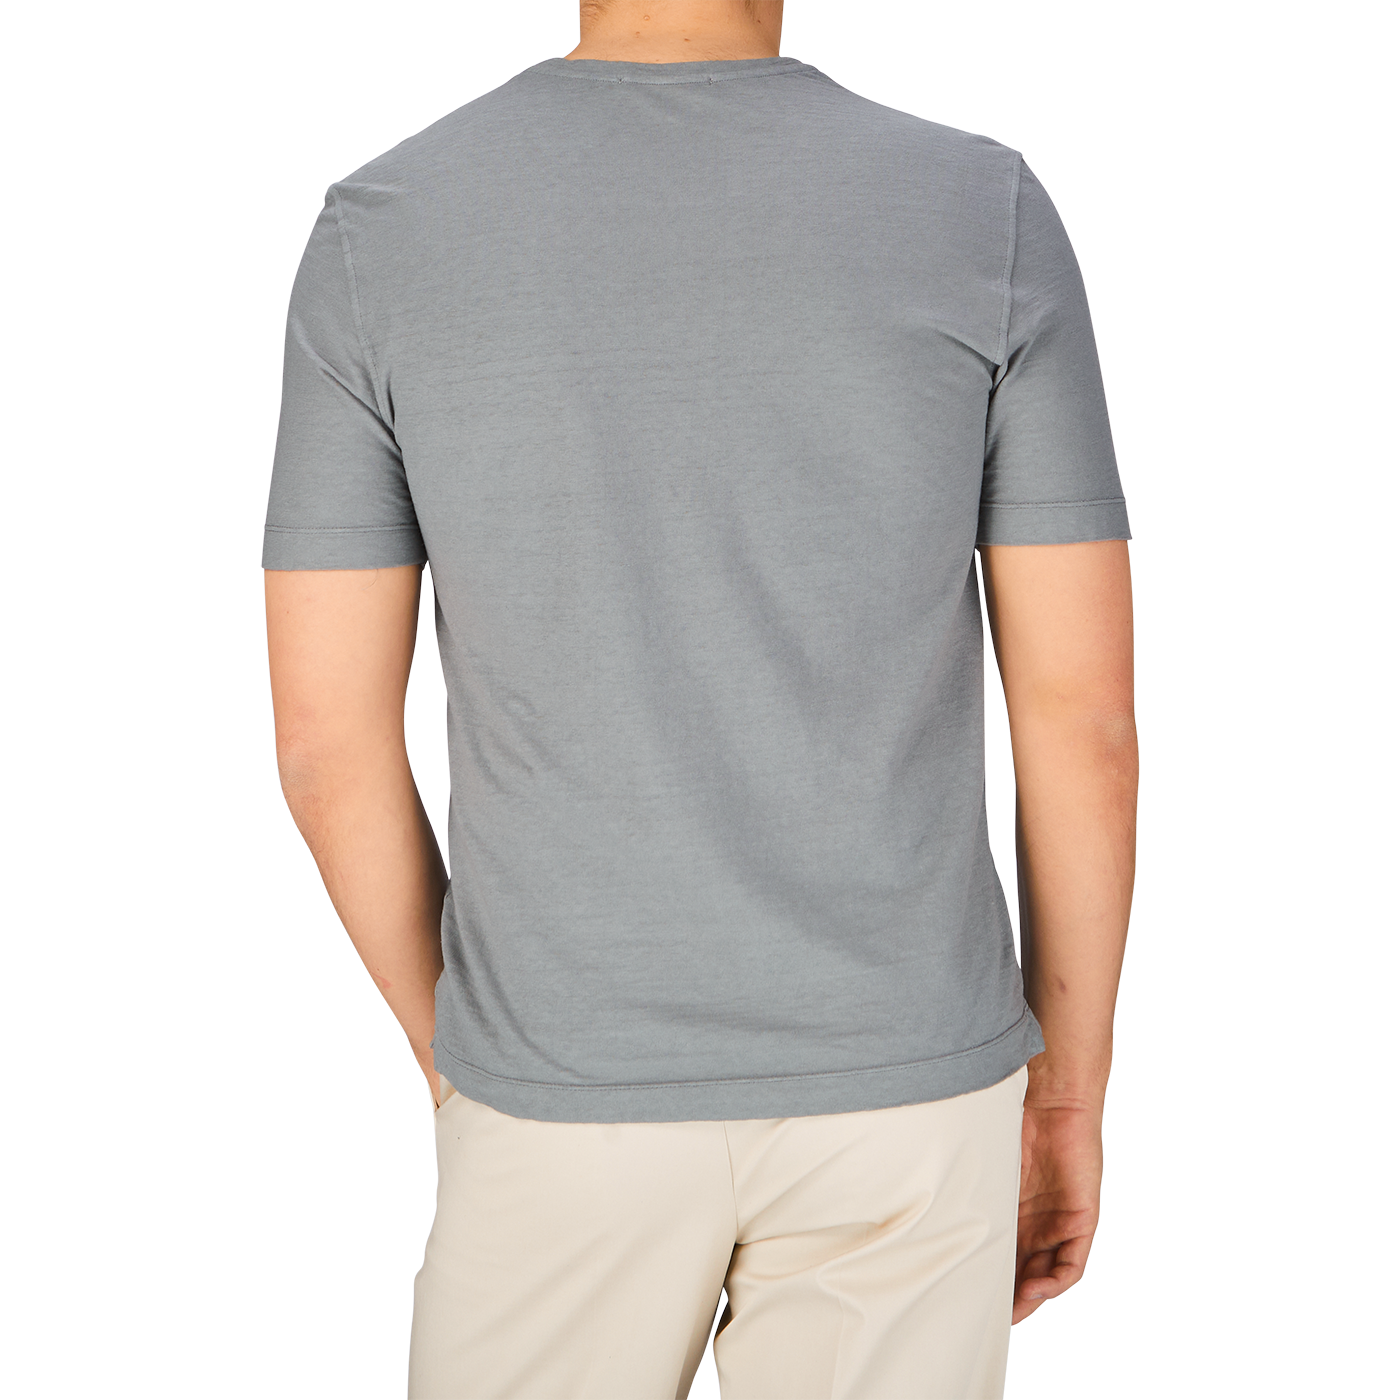 The man is wearing a Steel Grey Cotton Linen T-Shirt from Drumohr.